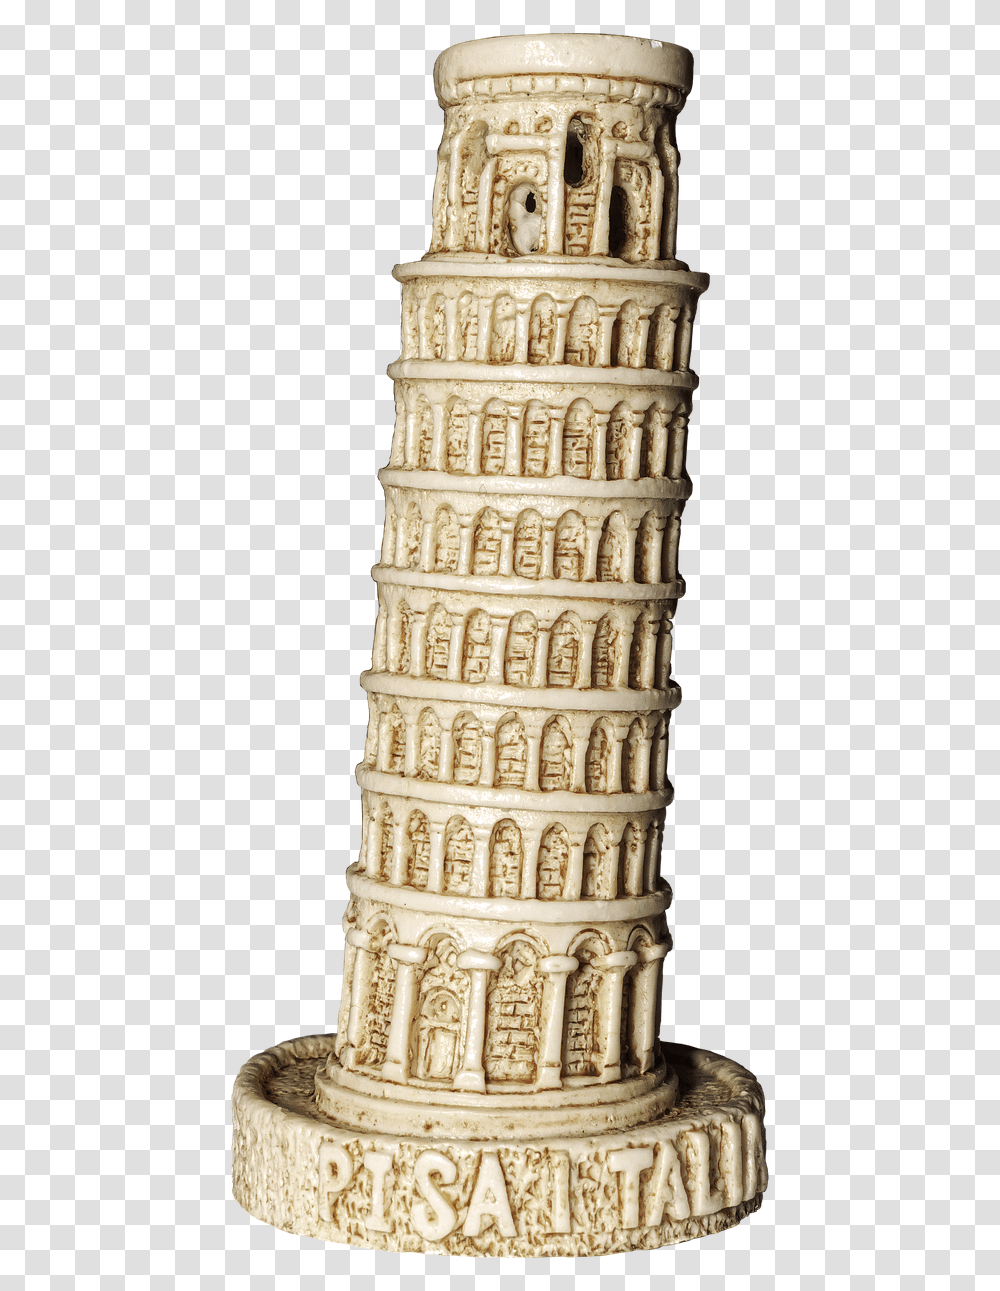 Italy Tower Askew Pisa Italy Leaning Tower Leaning Tower Of Pisa Background, Ivory, Architecture, Building, Wedding Cake Transparent Png